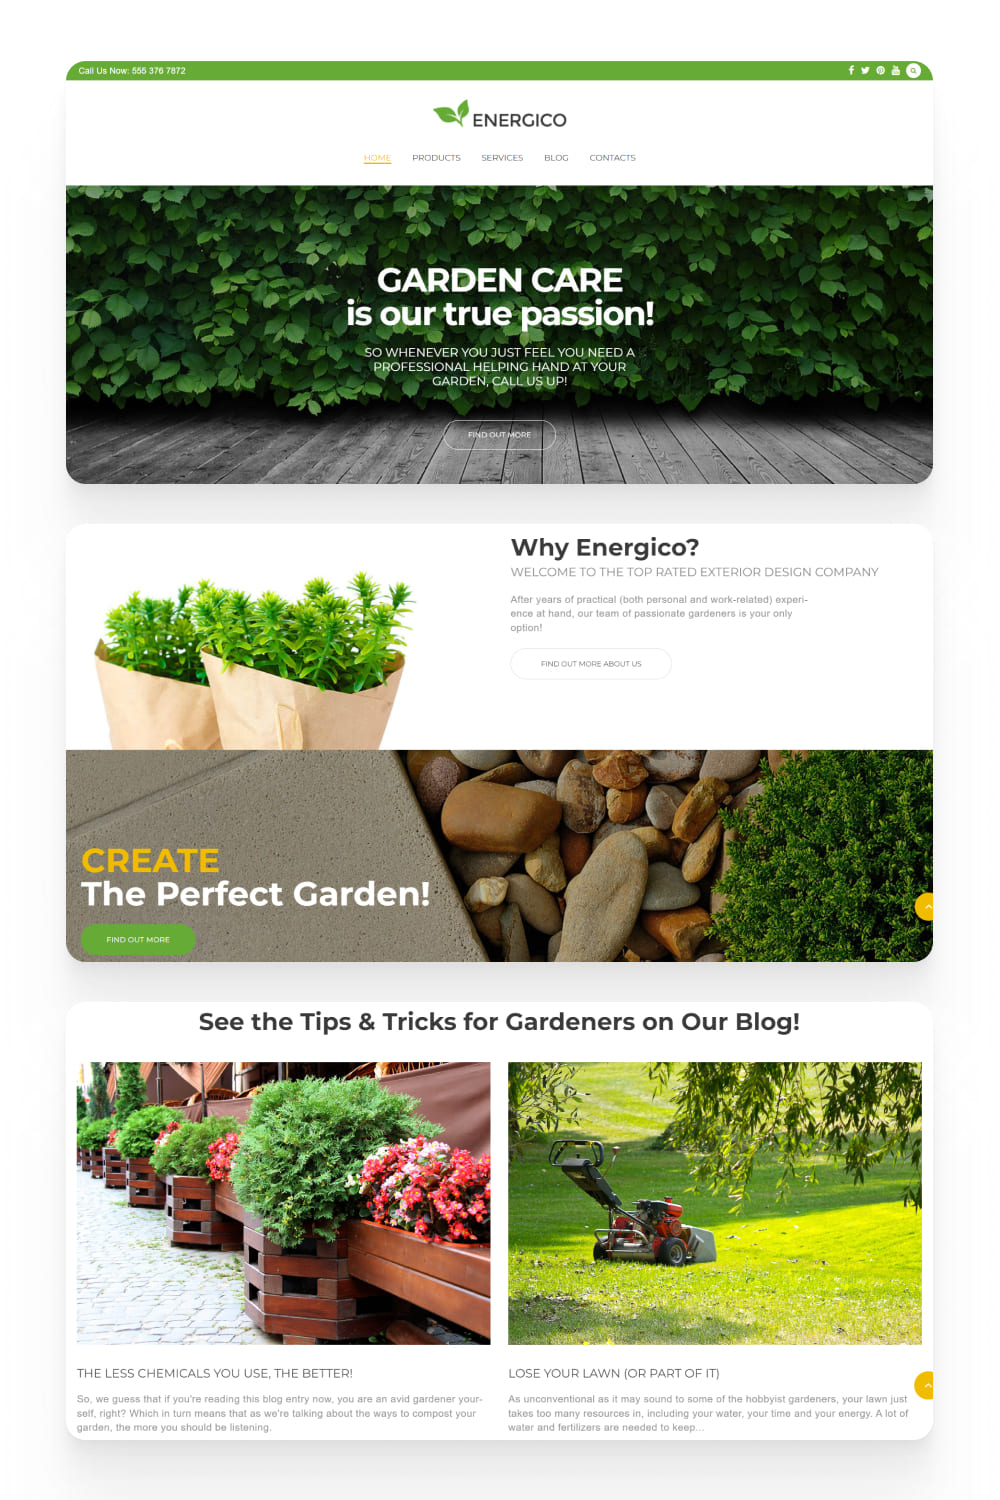 Screenshot of an online store with large photos of the garden and lawns.